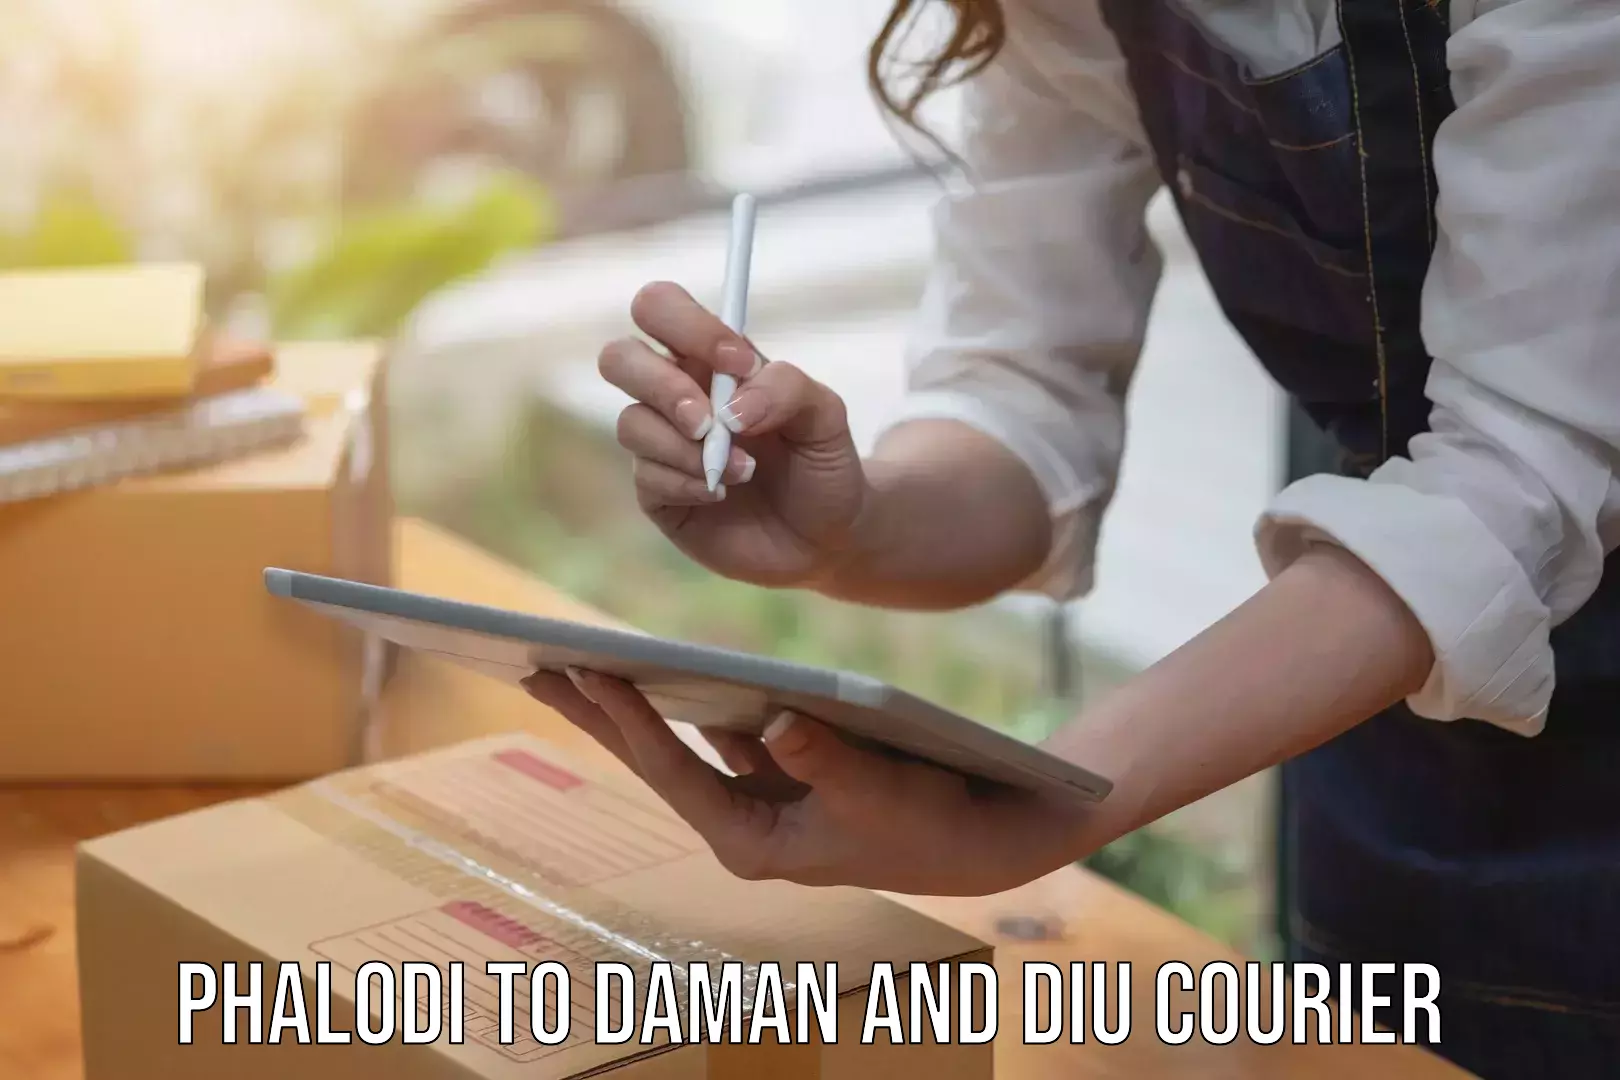 Global courier networks Phalodi to Daman and Diu